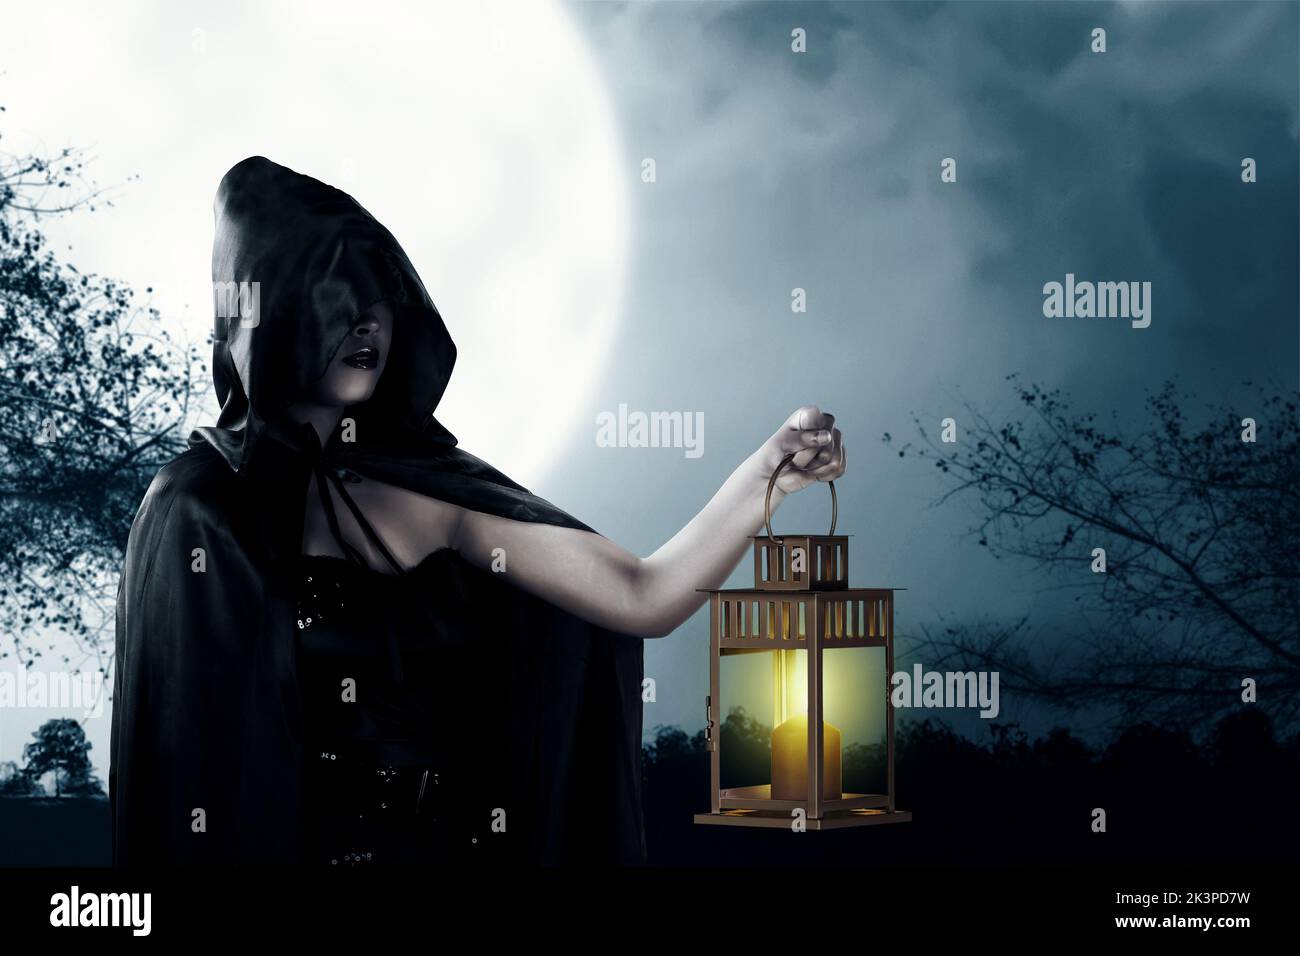 Asian witch woman with a black cloak holding a lantern standing with the night scene background Stock Photo